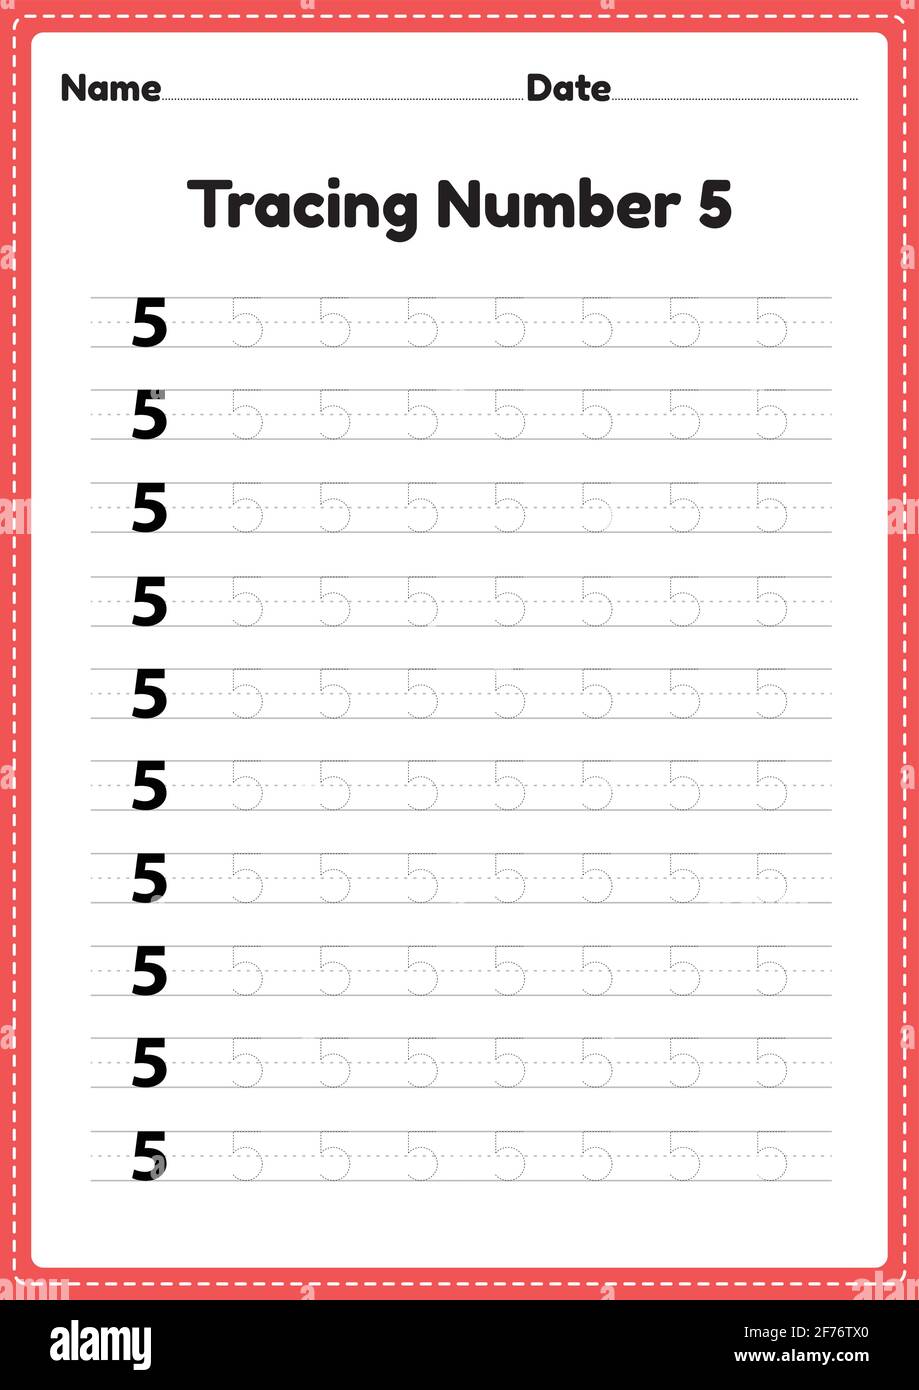 Tracing number 5 worksheet for kindergarten and preschool kids for educational handwriting practice in a printable page. Stock Vector